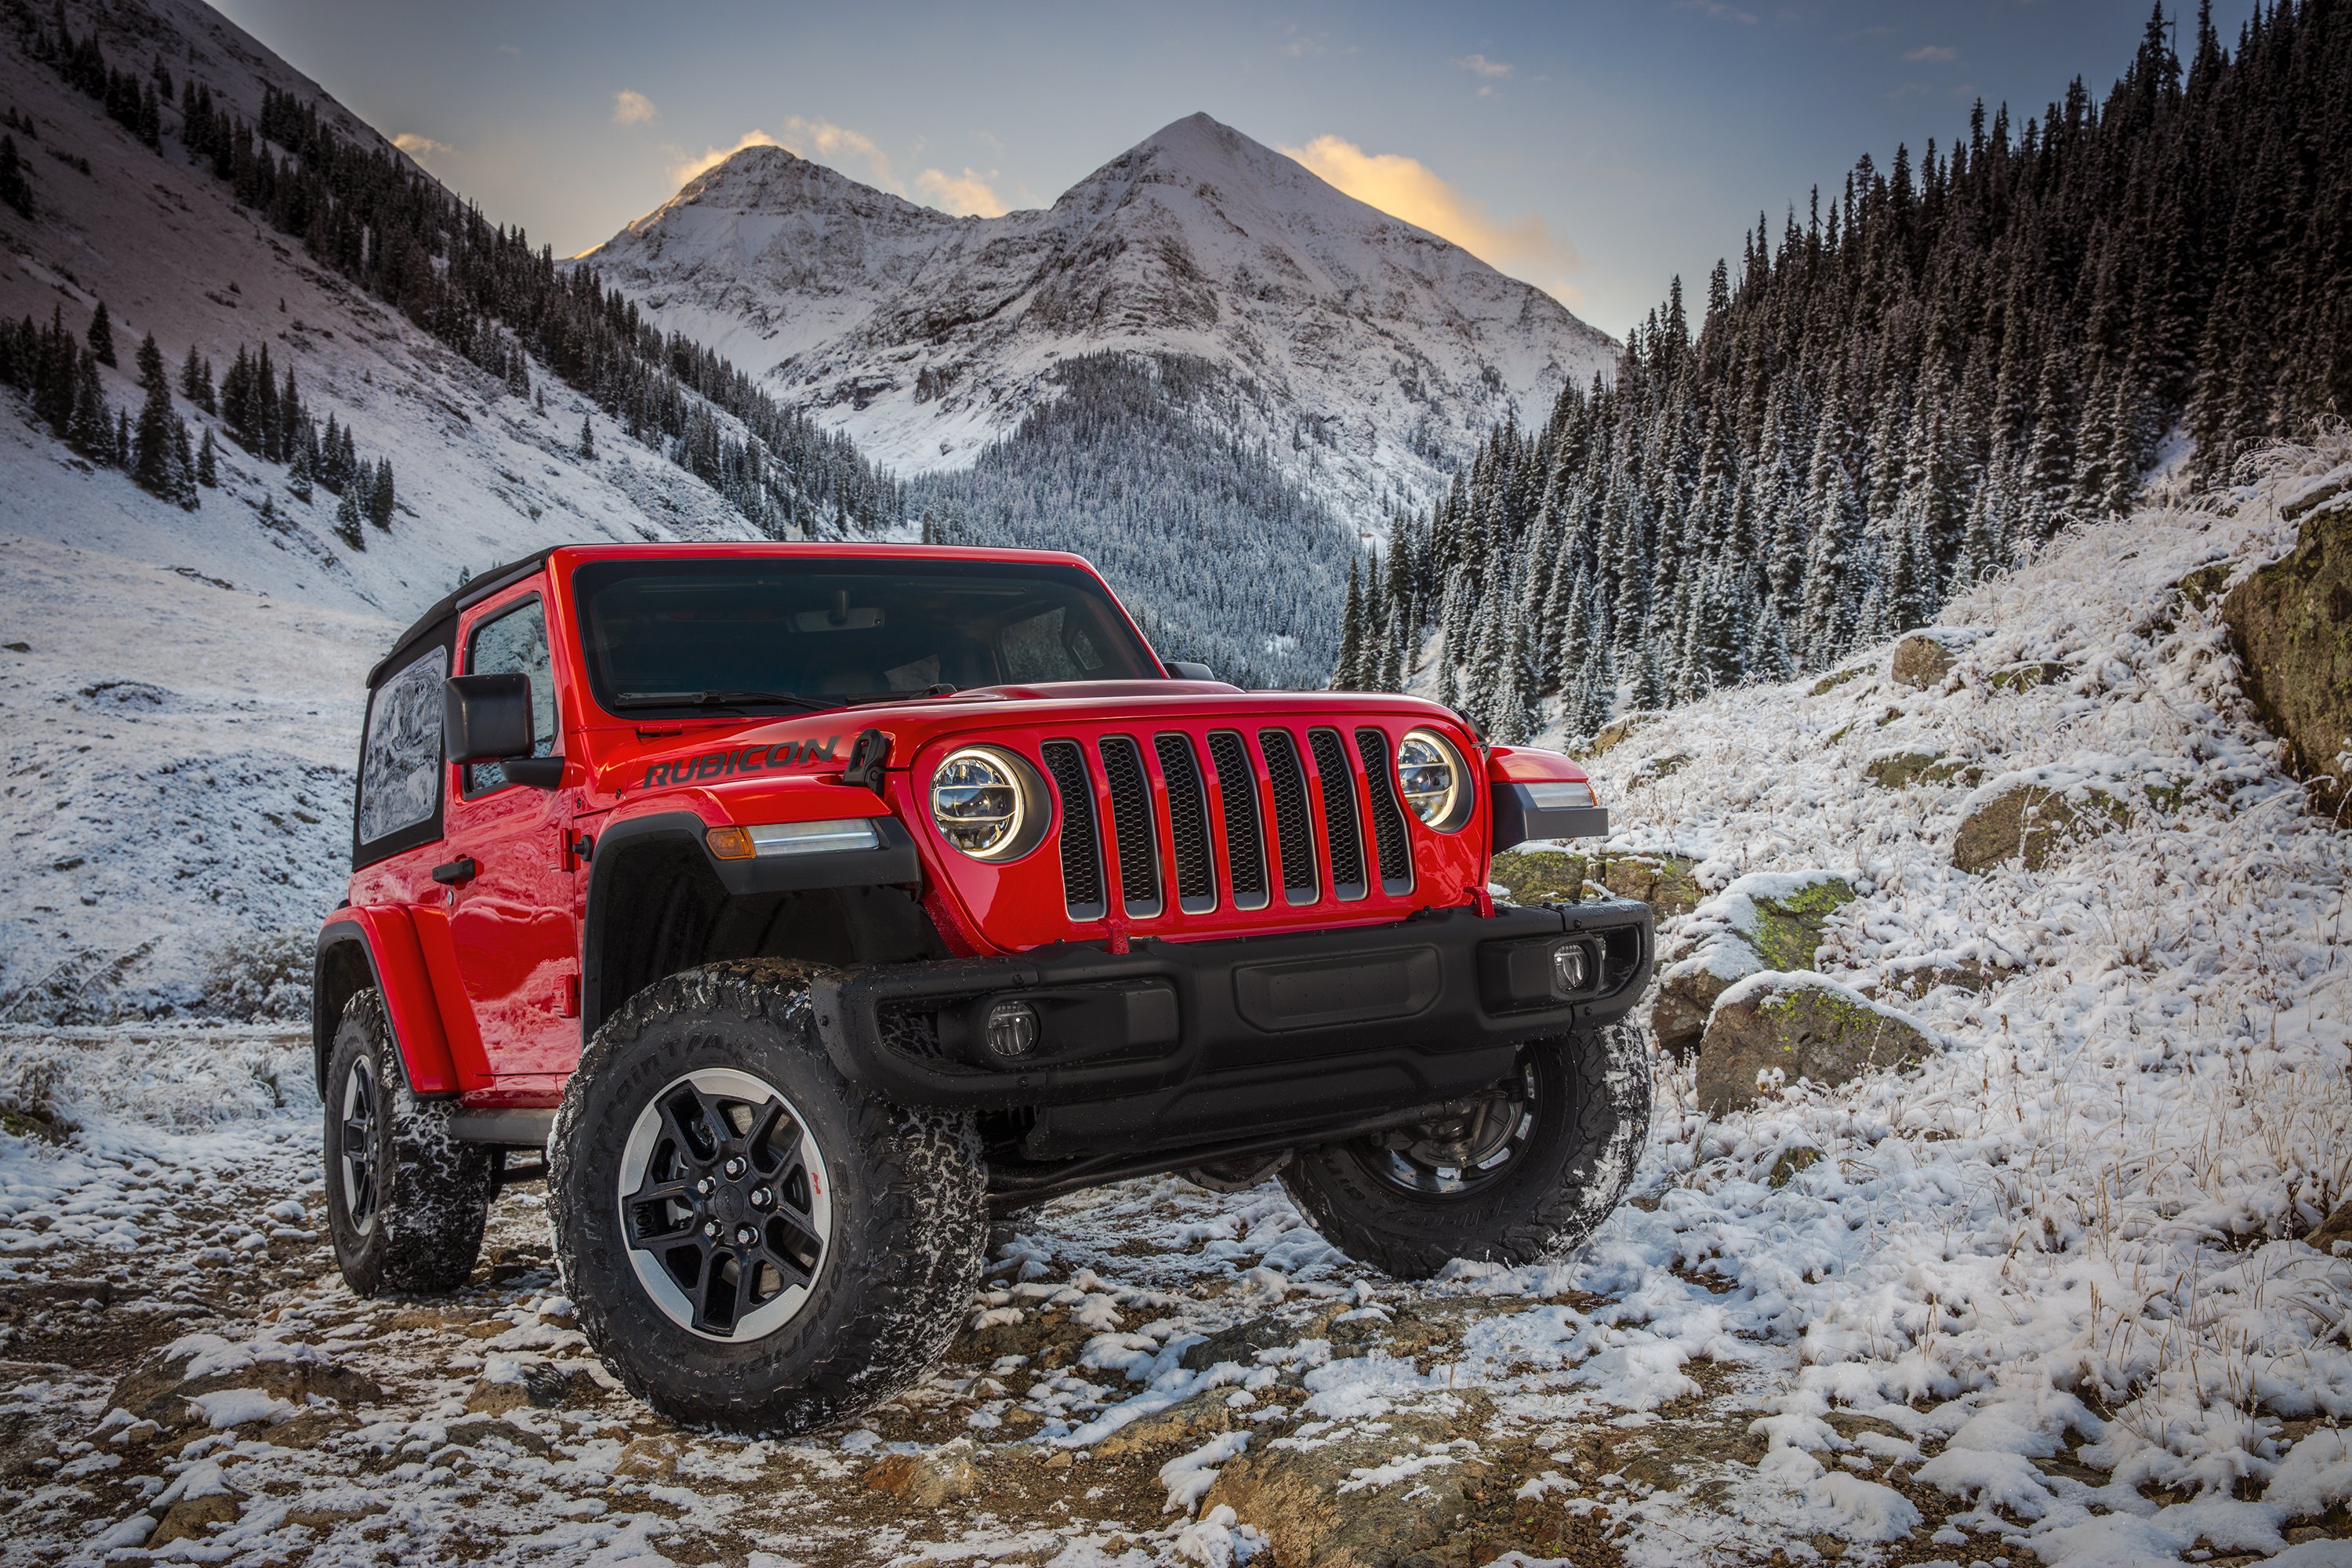 How Reliable Is the Jeep Wrangler?